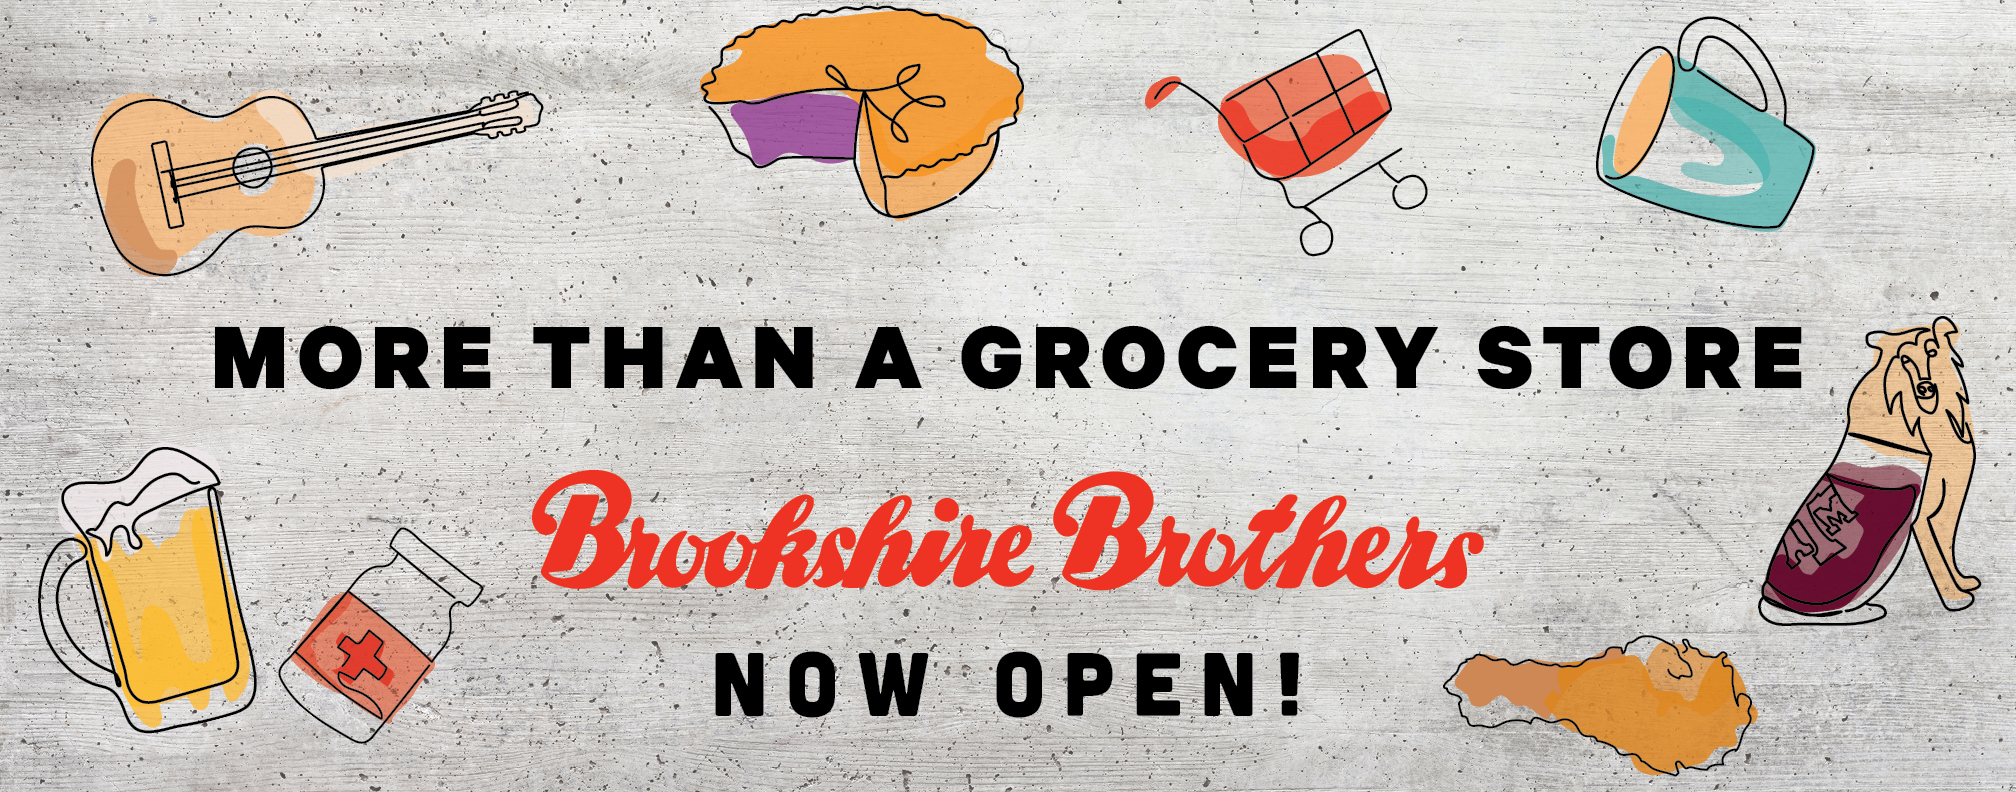 Built for Aggies - Brookshire Brothers